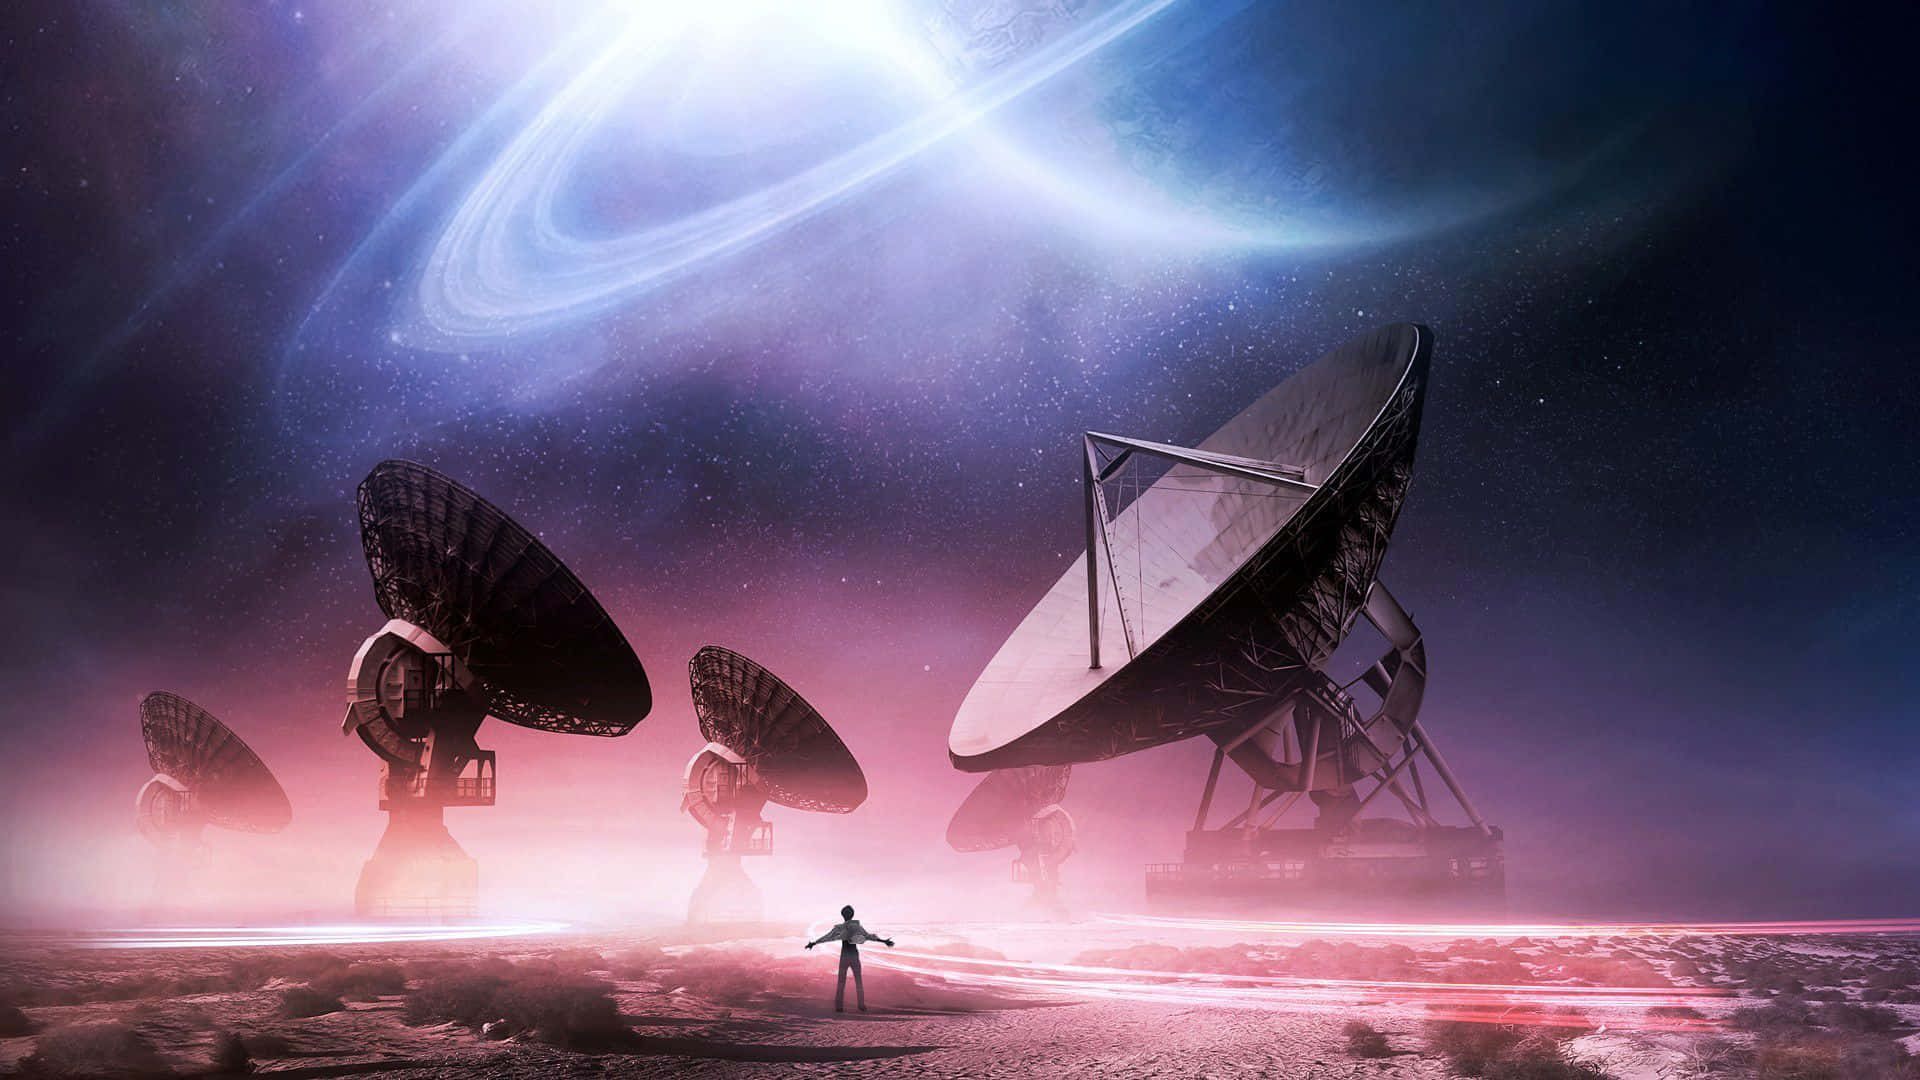 Impressive Radio Telescope in action at a remote observatory Wallpaper